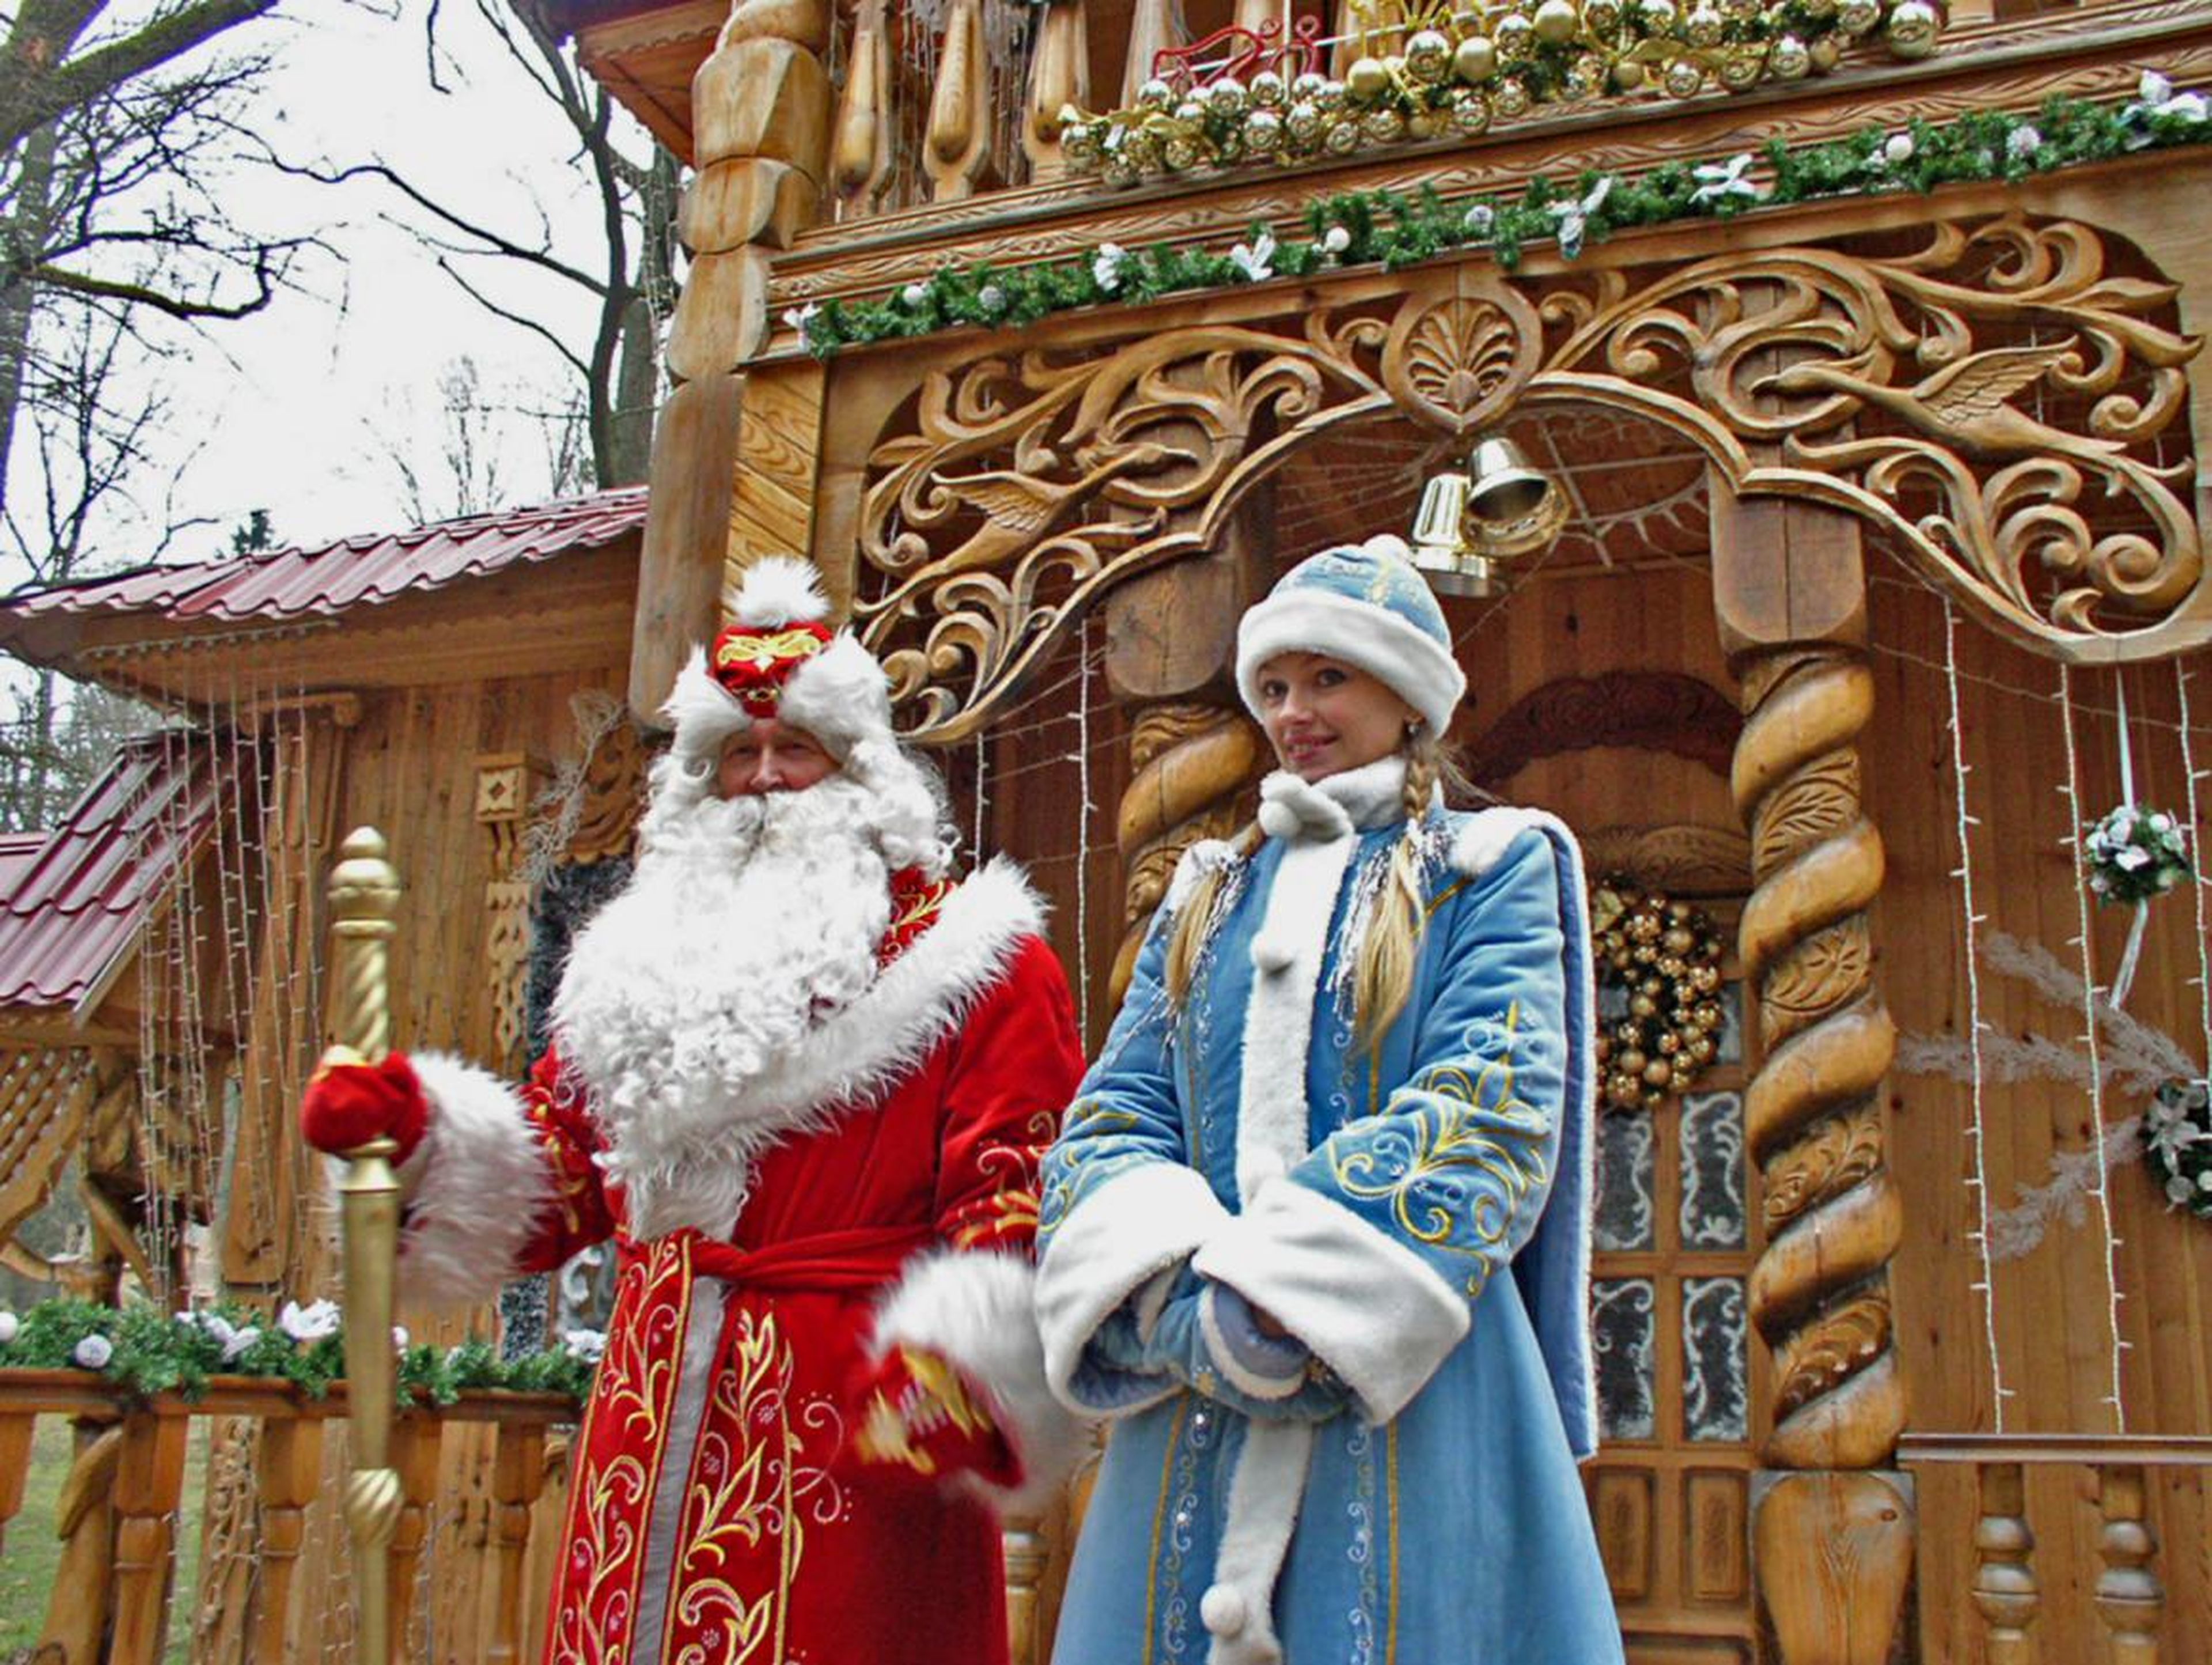 Ded Moroz poses with the Snow Maiden at a Christmas festival in Russia.